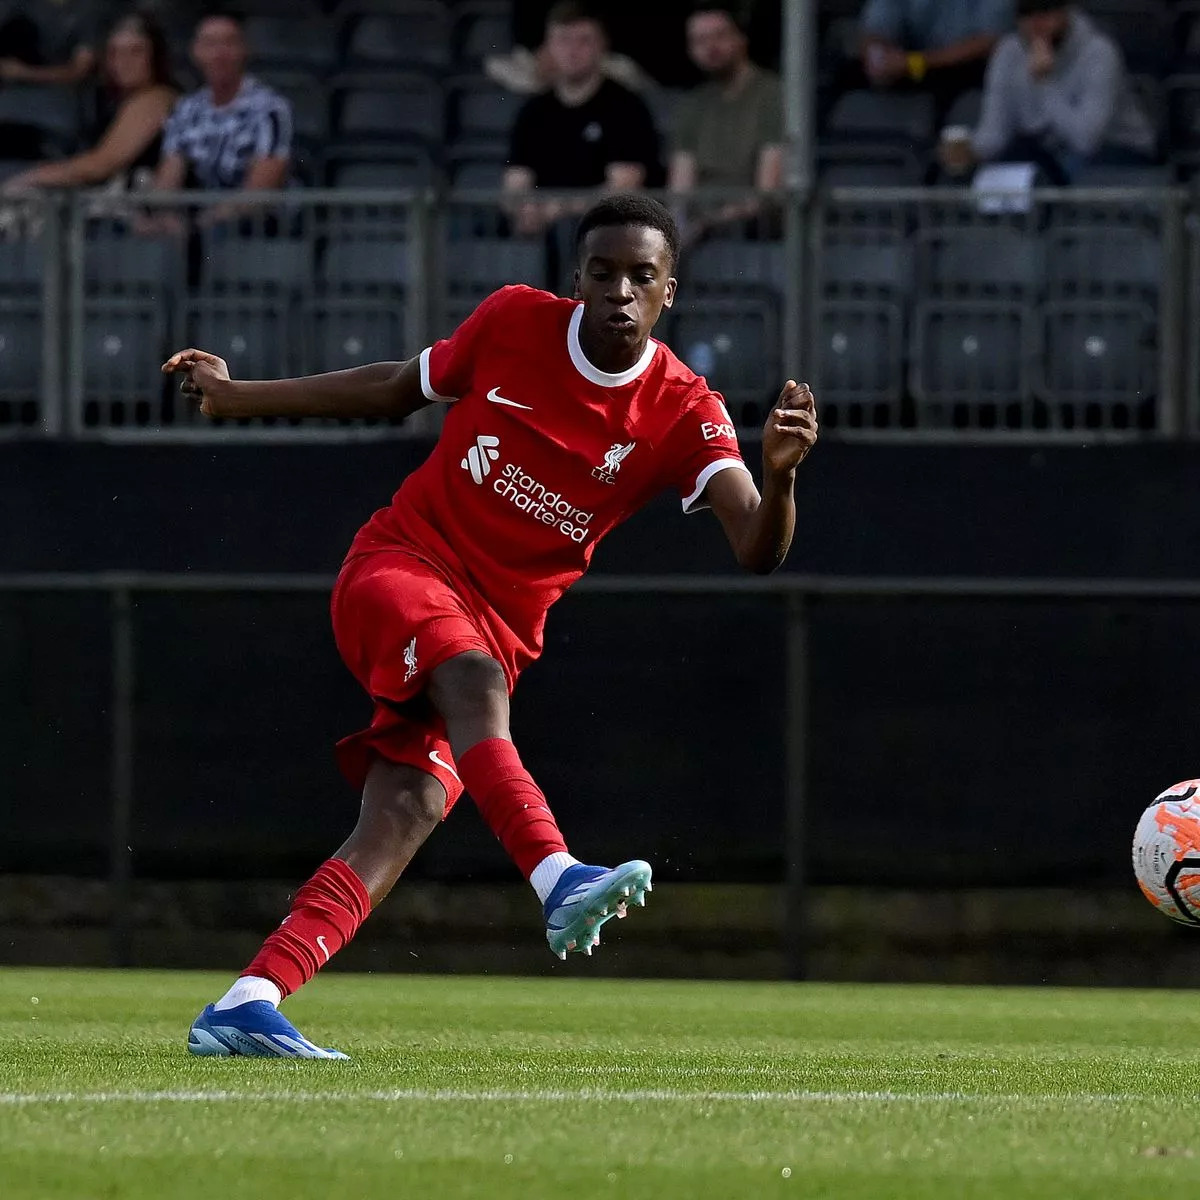 5 things to know about Trey Nyoni, the youngest player to debut for Liverpool